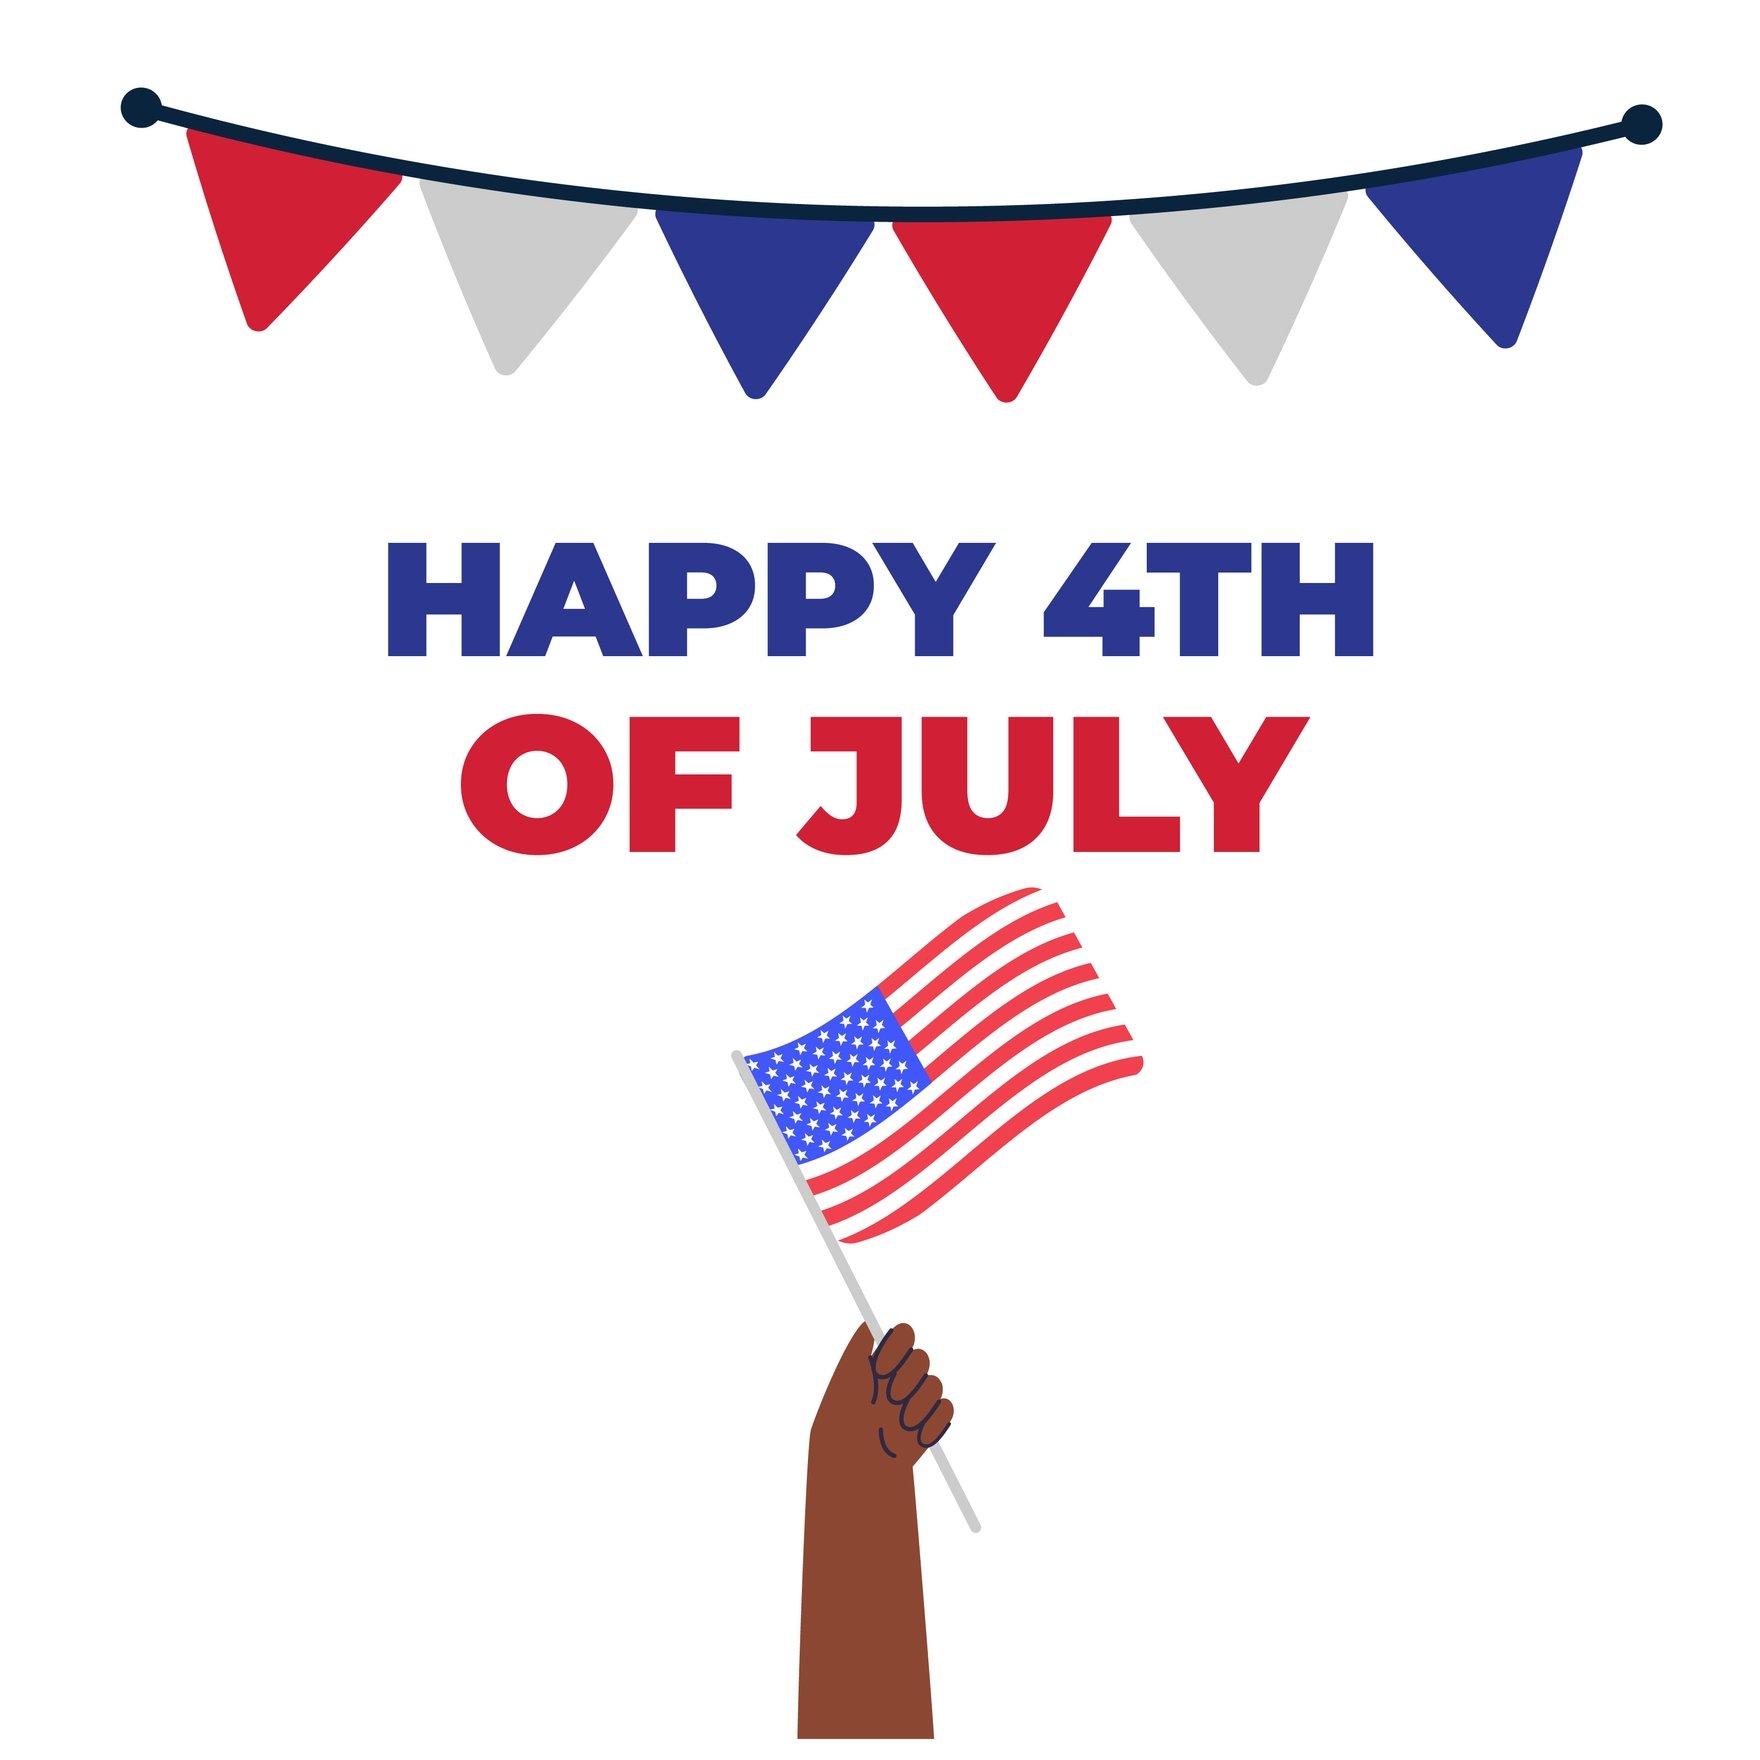 Free Patriotic 4th Of July Gif in Illustrator, EPS, SVG, JPG, GIF, PNG, After Effects